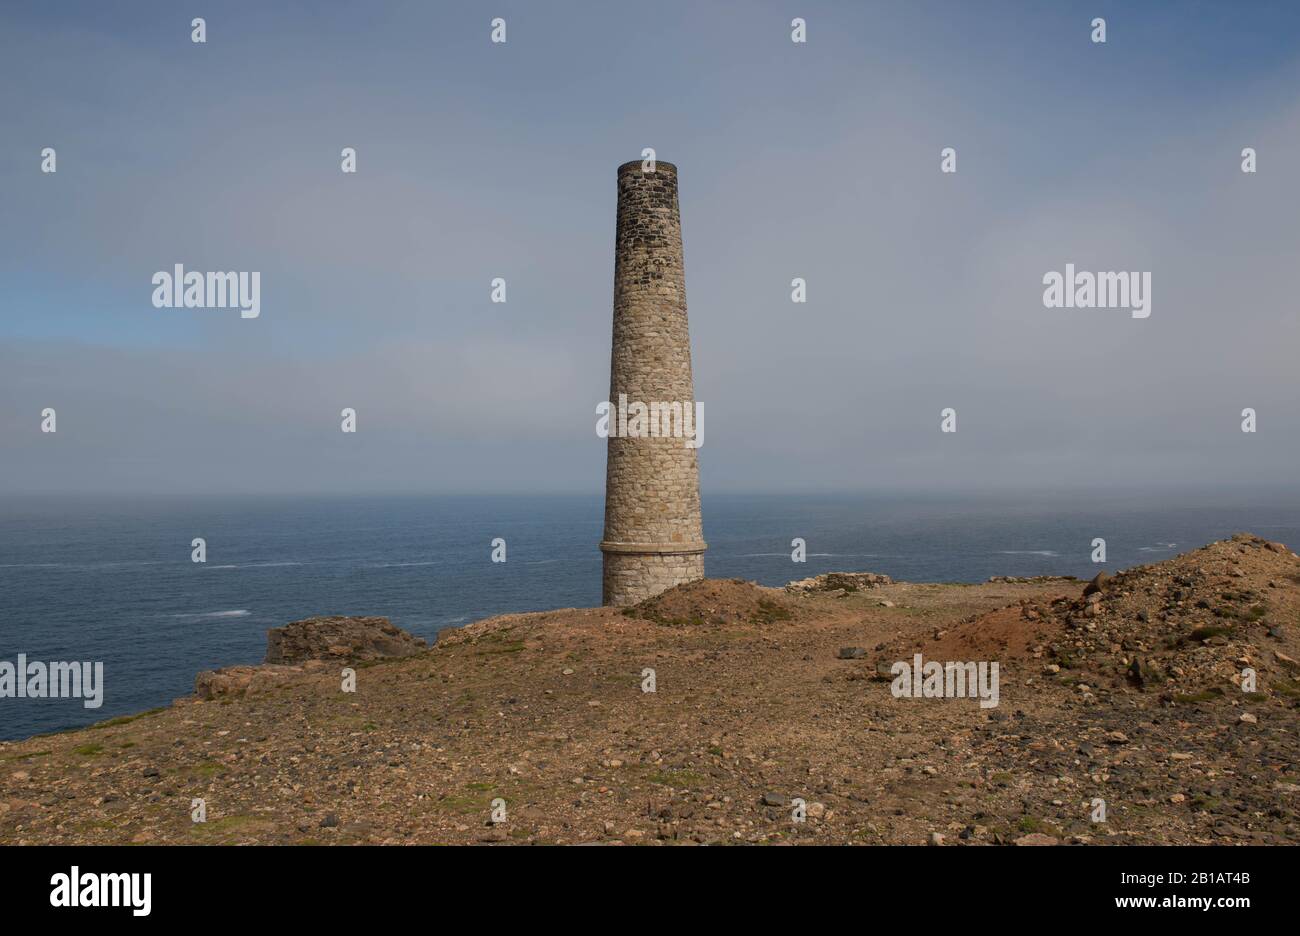 Disused Chimney on the South West Coast Path at the Abandoned Cornish Tin Mine at Geevor by the Atlantic Ocean in Cornwall,England,UK Stock Photo